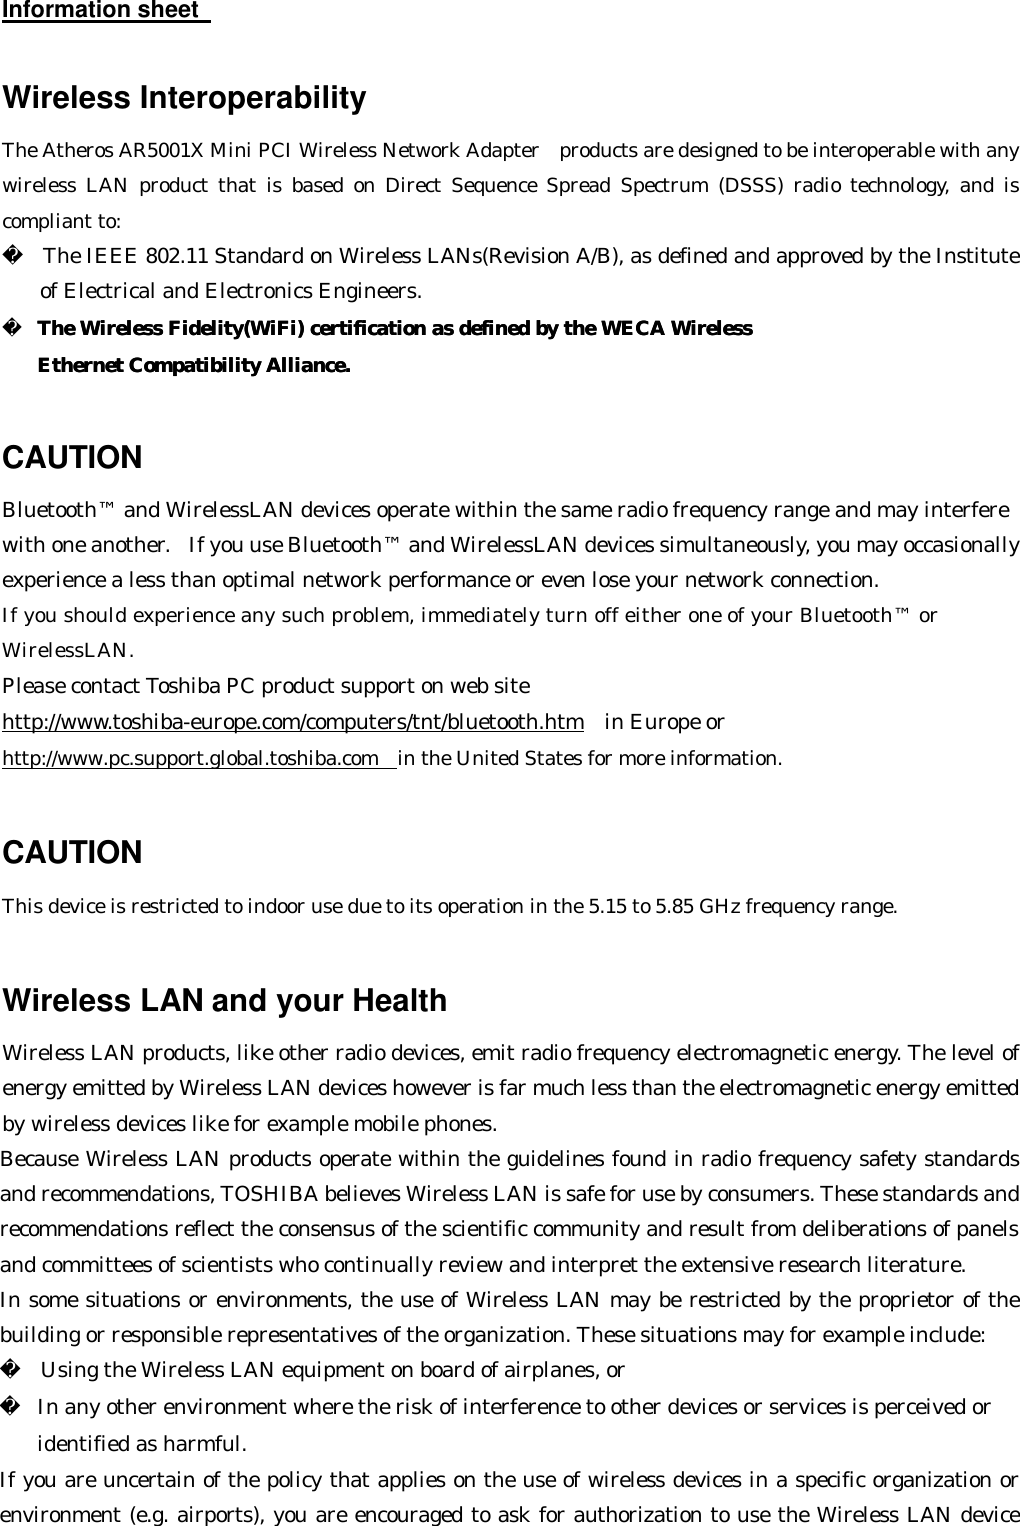 Information sheet     Wireless Interoperability The Atheros AR5001X Mini PCI Wireless Network Adapter  products are designed to be interoperable with any wireless LAN product that is based on Direct Sequence Spread Spectrum (DSSS) radio technology, and is compliant to:   The IEEE 802.11 Standard on Wireless LANs(Revision A/B), as defined and approved by the Institute of Electrical and Electronics Engineers.   The Wireless Fidelity(WiFi) certification as defined by the WECA Wireless The Wireless Fidelity(WiFi) certification as defined by the WECA Wireless    Ethernet Compatibility Alliance.Ethernet Compatibility Alliance.   CAUTION Bluetooth™ and WirelessLAN devices operate within the same radio frequency range and may interfere with one another.  If you use Bluetooth™ and WirelessLAN devices simultaneously, you may occasionally experience a less than optimal network performance or even lose your network connection. If you should experience any such problem, immediately turn off either one of your Bluetooth™ or WirelessLAN. Please contact Toshiba PC product support on web site http://www.toshiba-europe.com/computers/tnt/bluetooth.htm  in Europe or http://www.pc.support.global.toshiba.com in the United States for more information.  CAUTION  This device is restricted to indoor use due to its operation in the 5.15 to 5.85 GHz frequency range.  Wireless LAN and your Health Wireless LAN products, like other radio devices, emit radio frequency electromagnetic energy. The level of energy emitted by Wireless LAN devices however is far much less than the electromagnetic energy emitted by wireless devices like for example mobile phones. Because Wireless LAN products operate within the guidelines found in radio frequency safety standards and recommendations, TOSHIBA believes Wireless LAN is safe for use by consumers. These standards and recommendations reflect the consensus of the scientific community and result from deliberations of panels and committees of scientists who continually review and interpret the extensive research literature. In some situations or environments, the use of Wireless LAN may be restricted by the proprietor of the building or responsible representatives of the organization. These situations may for example include:   Using the Wireless LAN equipment on board of airplanes, or  In any other environment where the risk of interference to other devices or services is perceived or   identified as harmful. If you are uncertain of the policy that applies on the use of wireless devices in a specific organization or environment (e.g. airports), you are encouraged to ask for authorization to use the Wireless LAN device 